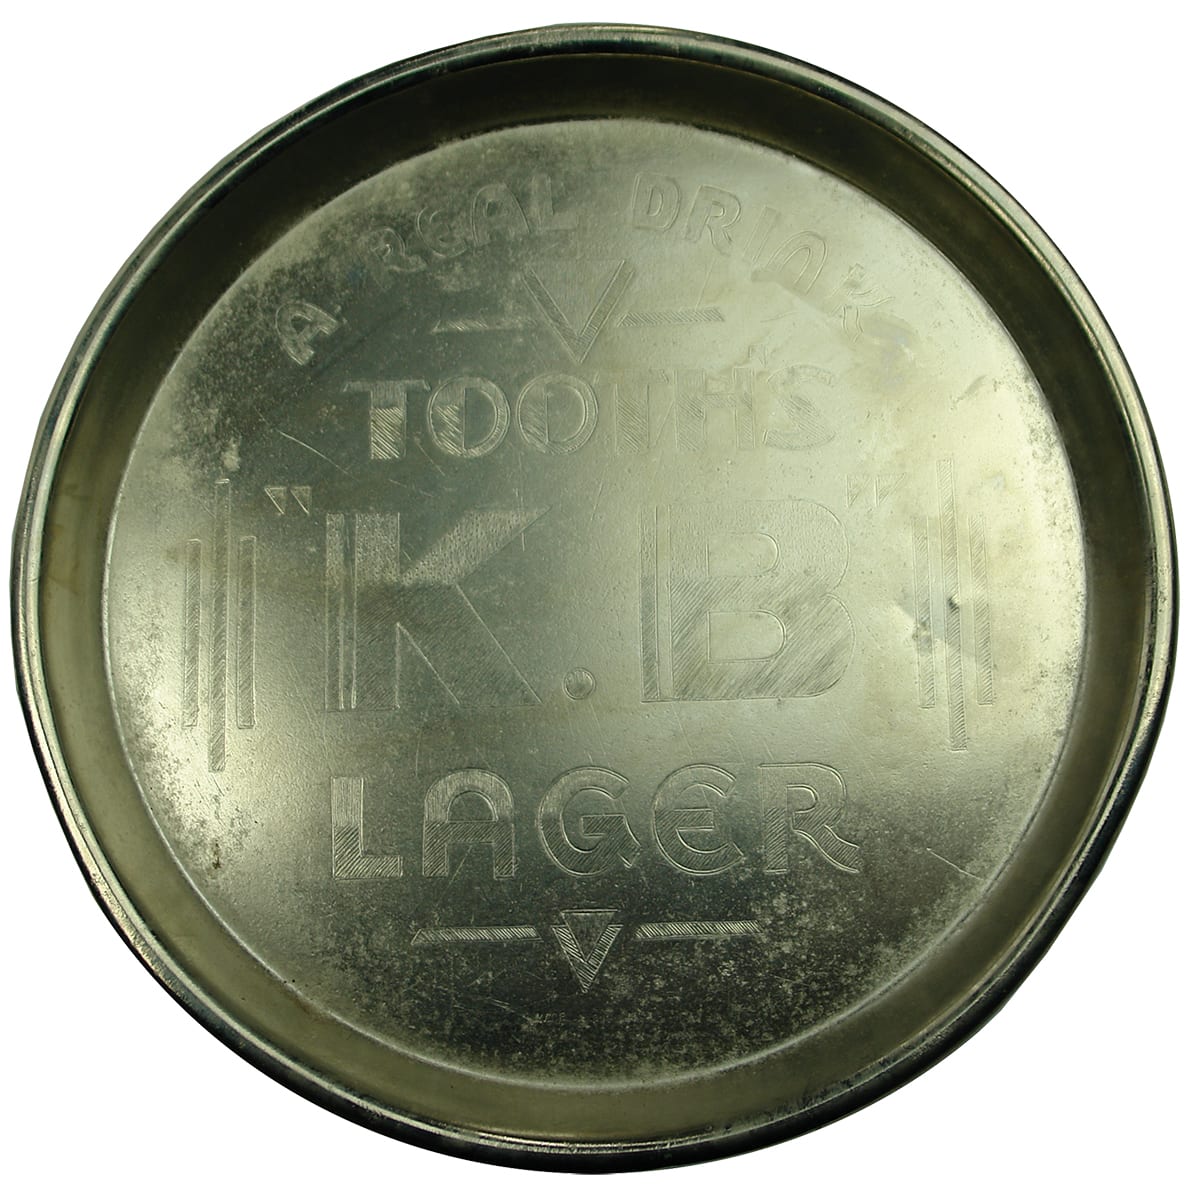 Serving Tray. Tooth's K. B Lager. Electro-plated. (Sydney, New South Wales)